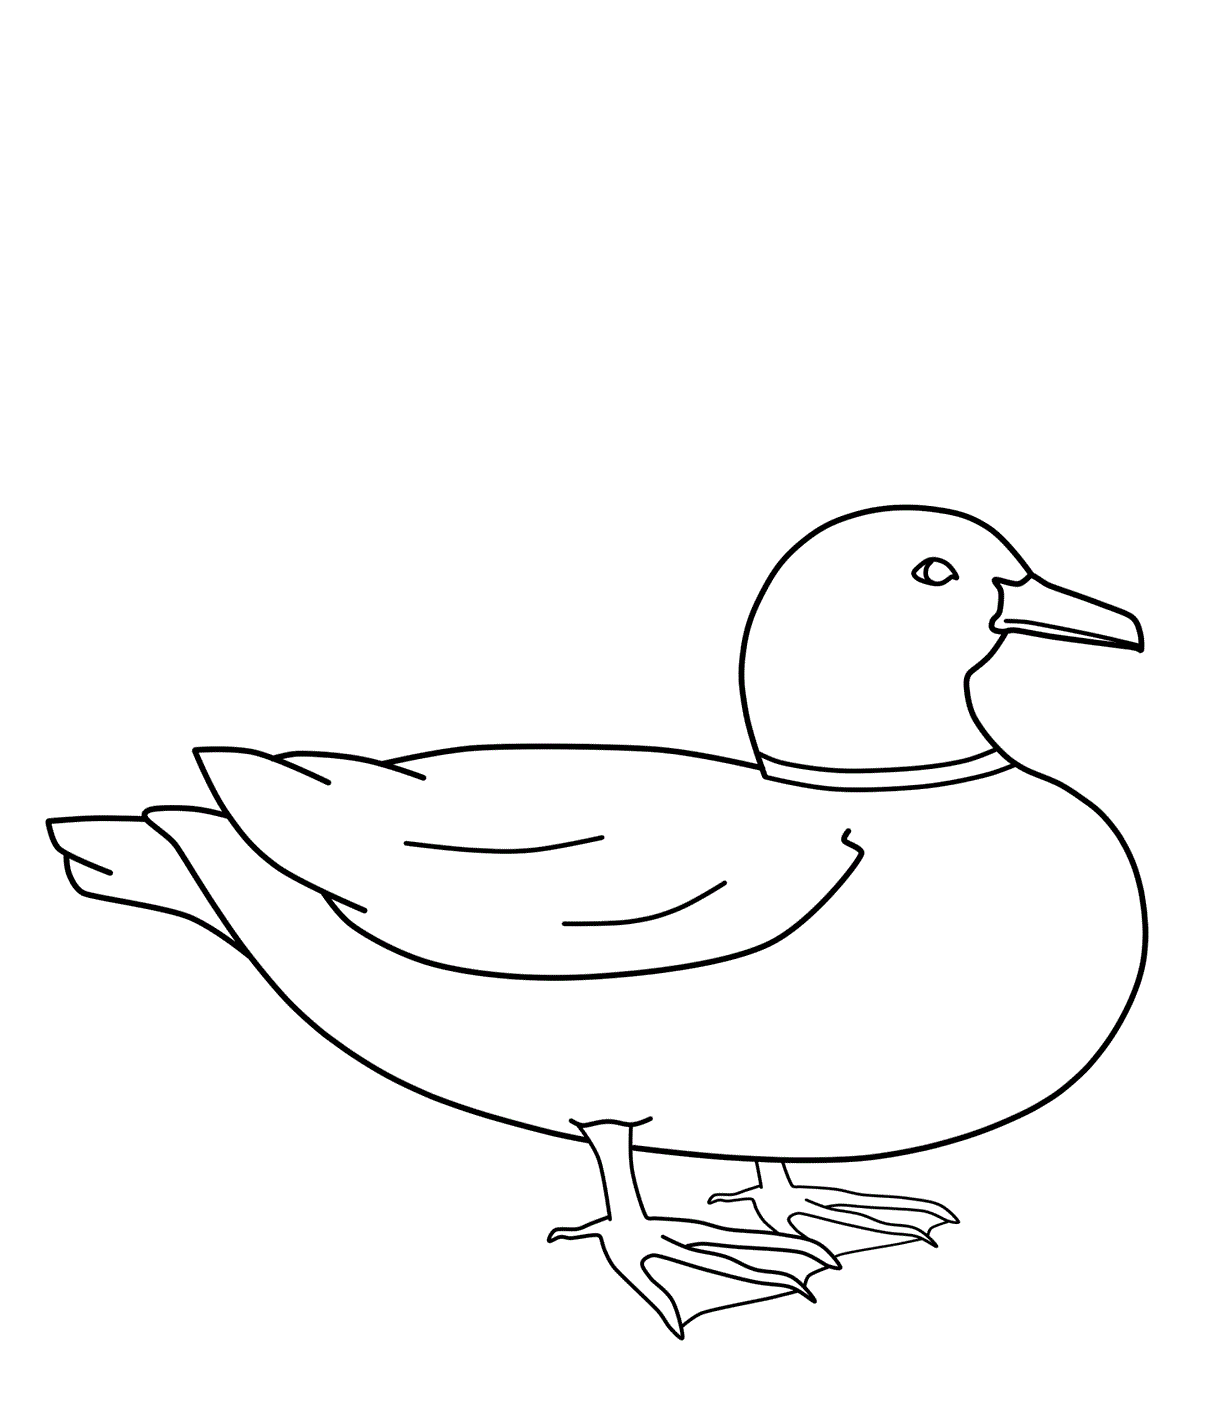 coloring sheet duck duck coloring pages best coloring pages for kids duck coloring sheet 1 2